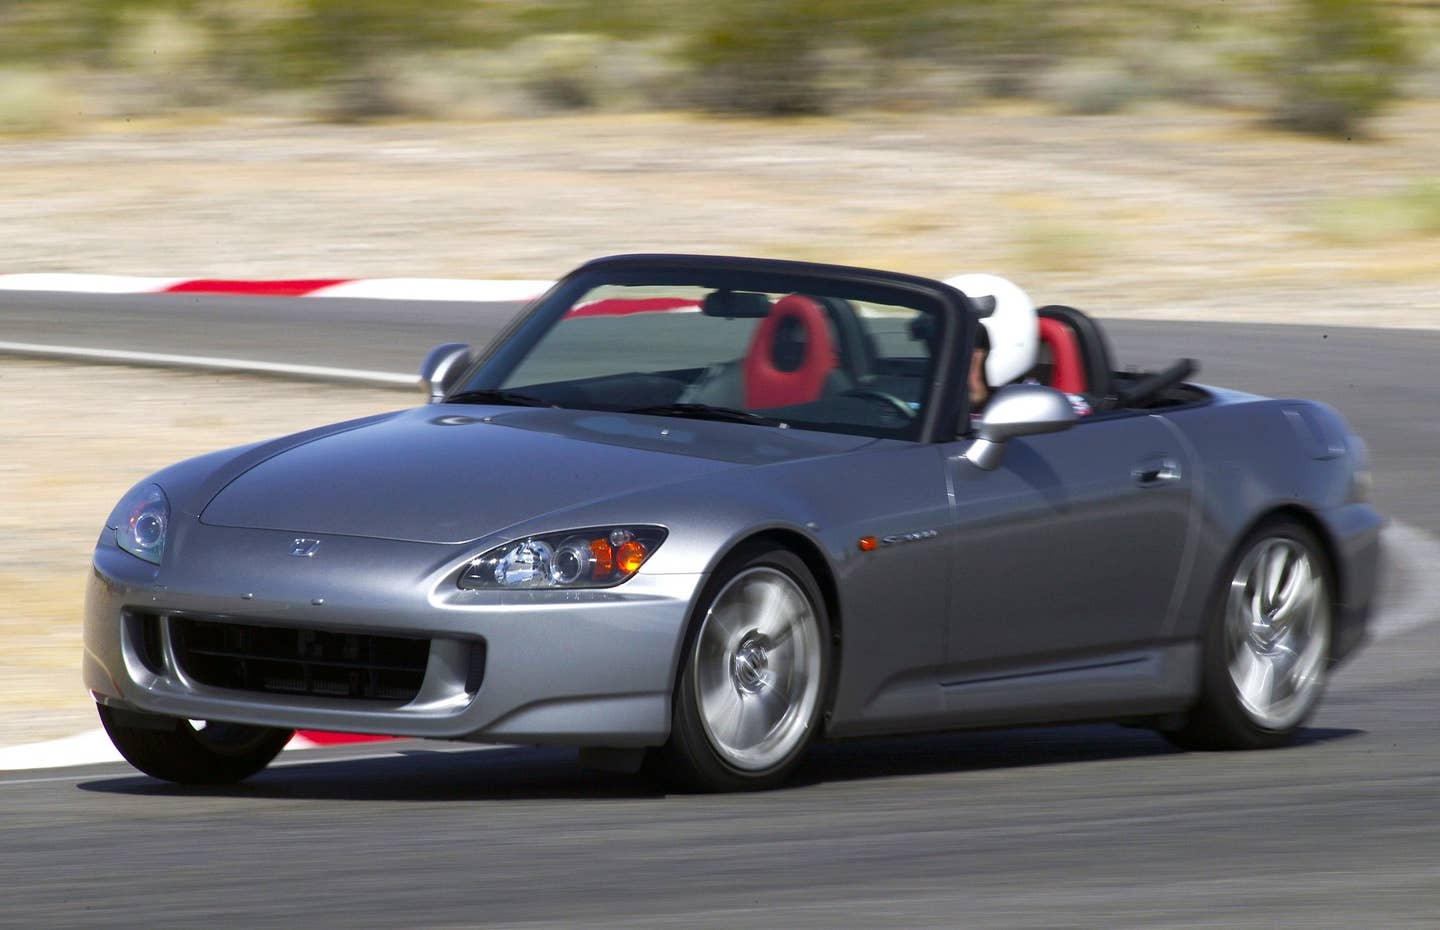 Honda S2000: Four Steps To Prep It for the Track